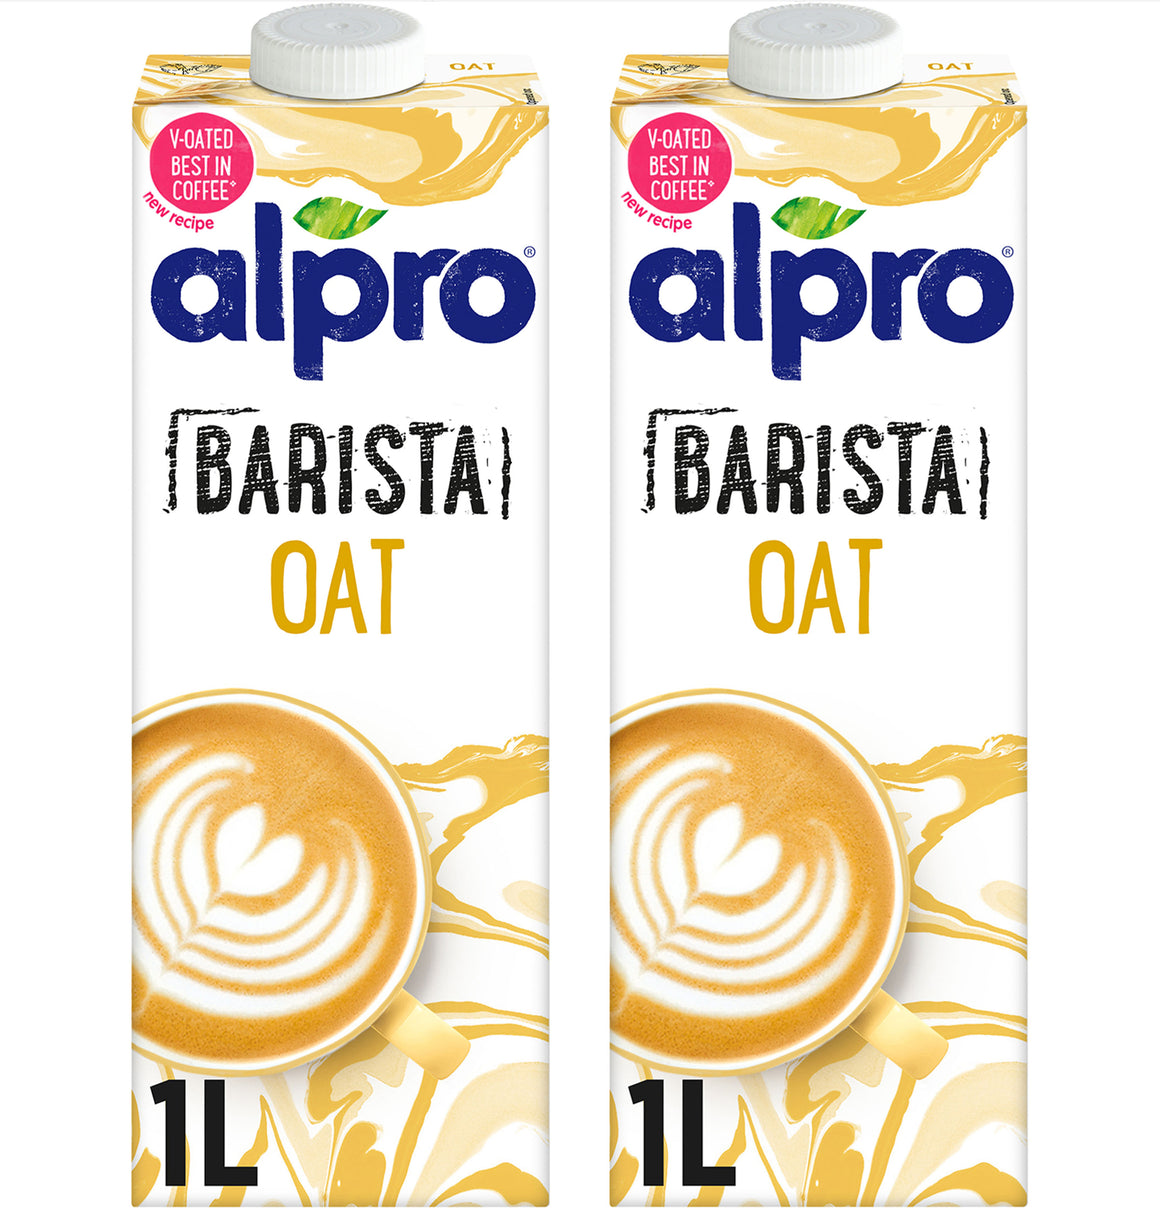 Alpro Barista Oat Drink 1L, New Recipe,Voted Best in Coffee(Dual Pack 1Lx 2), 100% Plant Based And Dairy Free, Suitable For Vegans, Naturally Free From Lactose, Rich In Nutrients